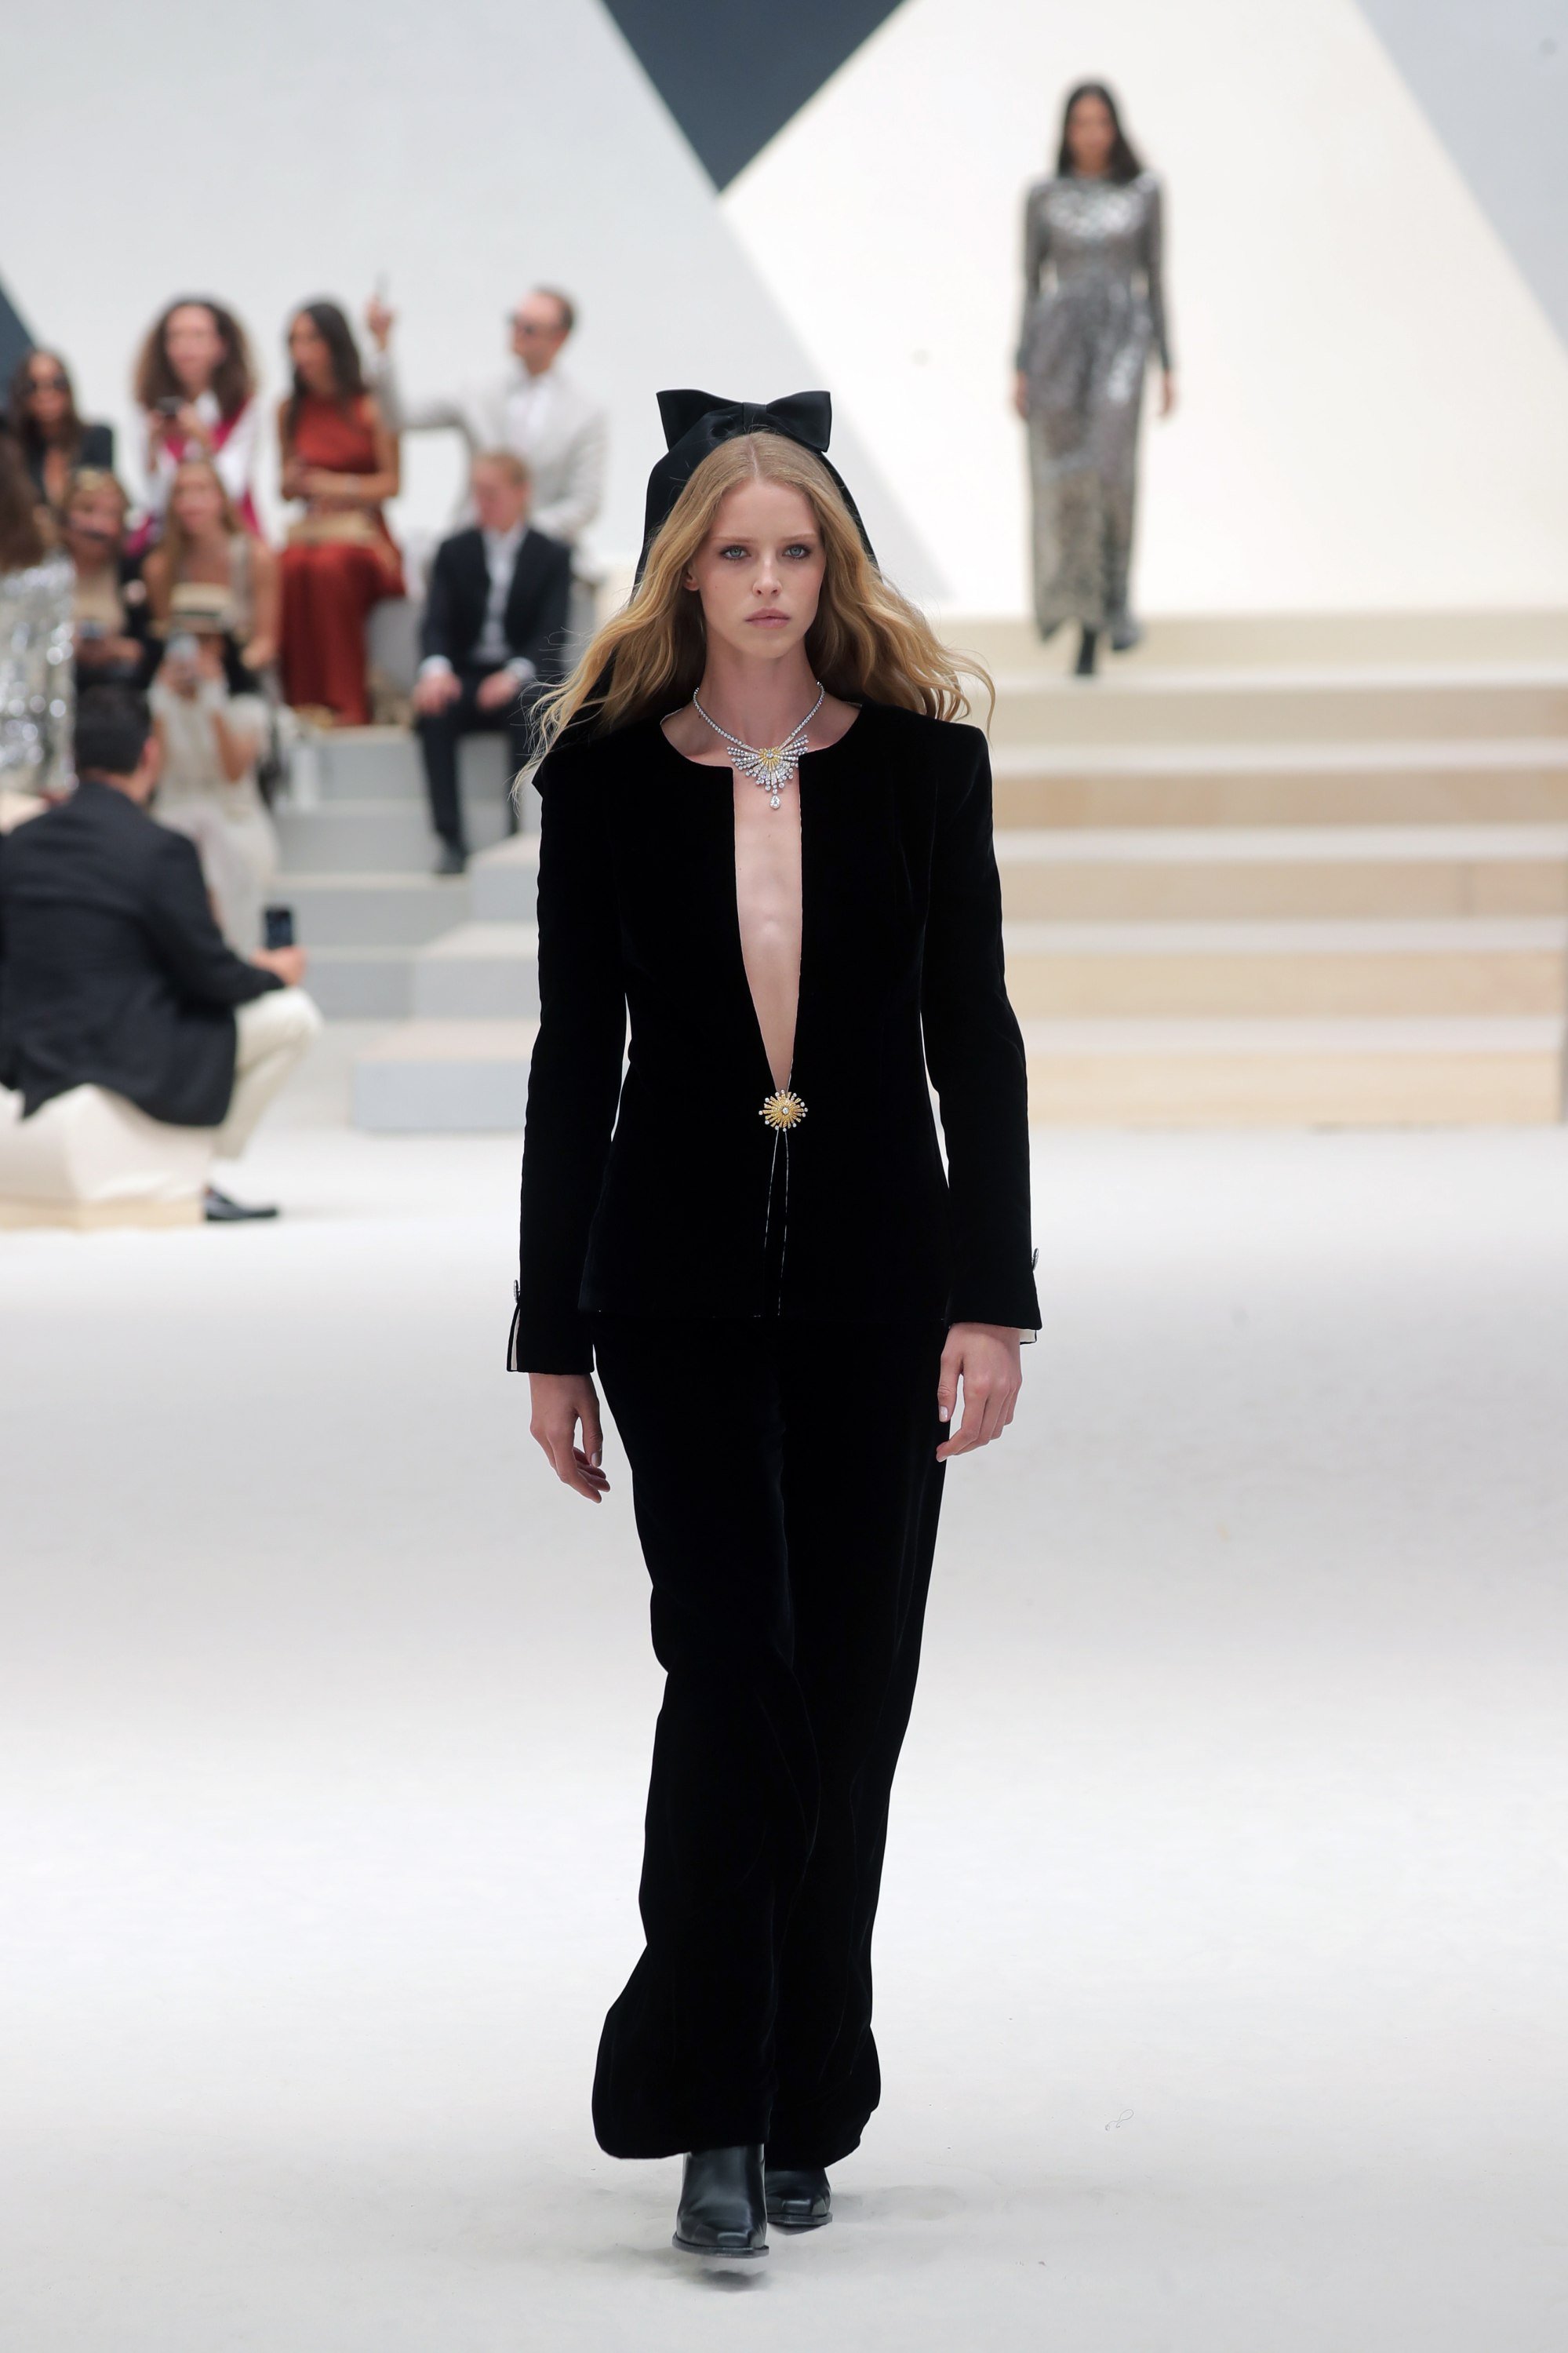 Paris Haute Couture Week: Chanel's autumn/winter 2022-23 collection by  Virginie Viard is a dreamy vision of gentle colours, lines and shapes – and  statement details